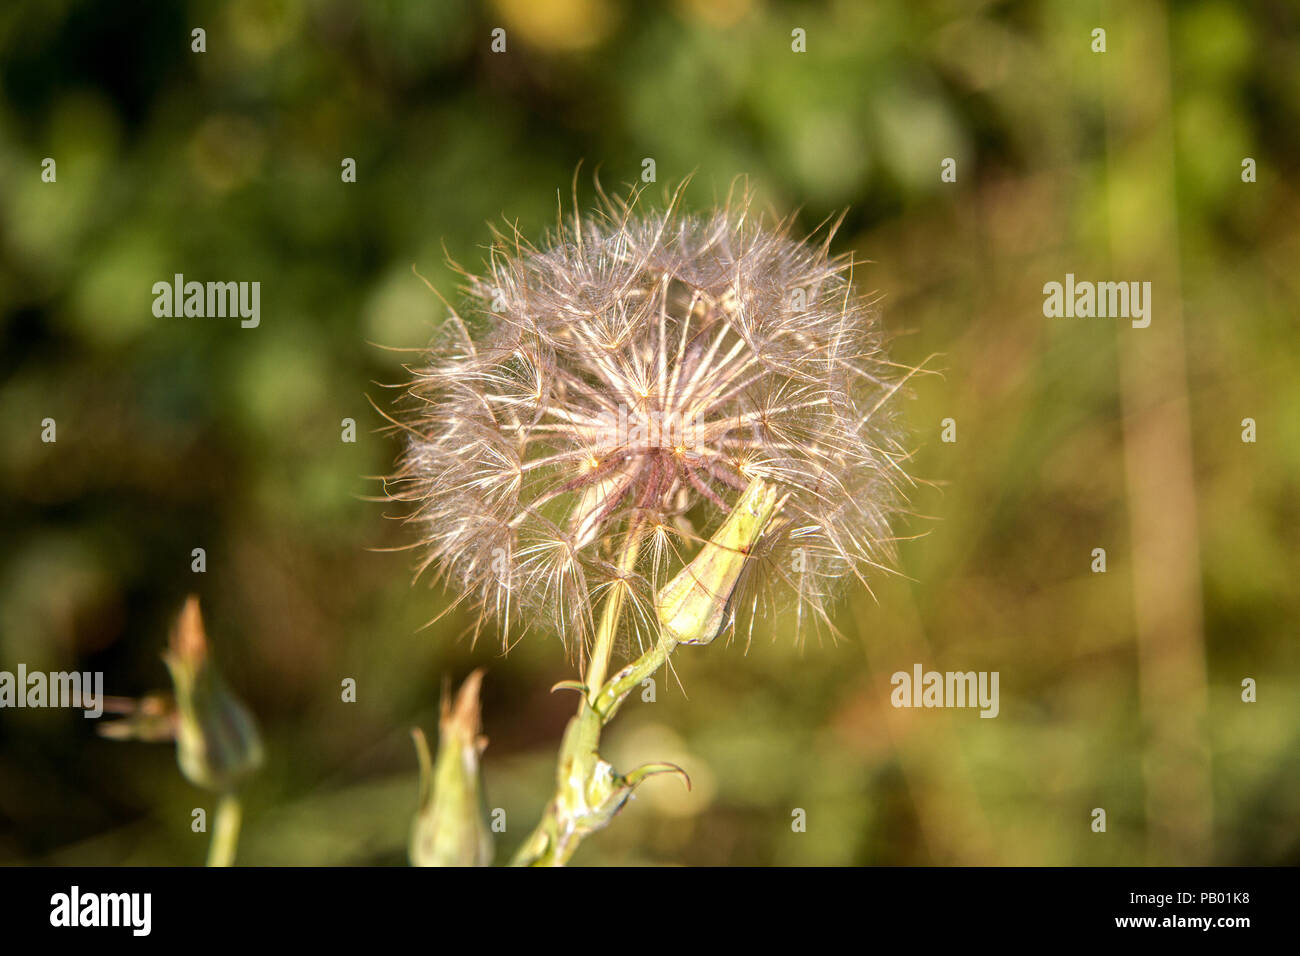 image of a large bloomed dandelion stalk in a meadow Stock Photo